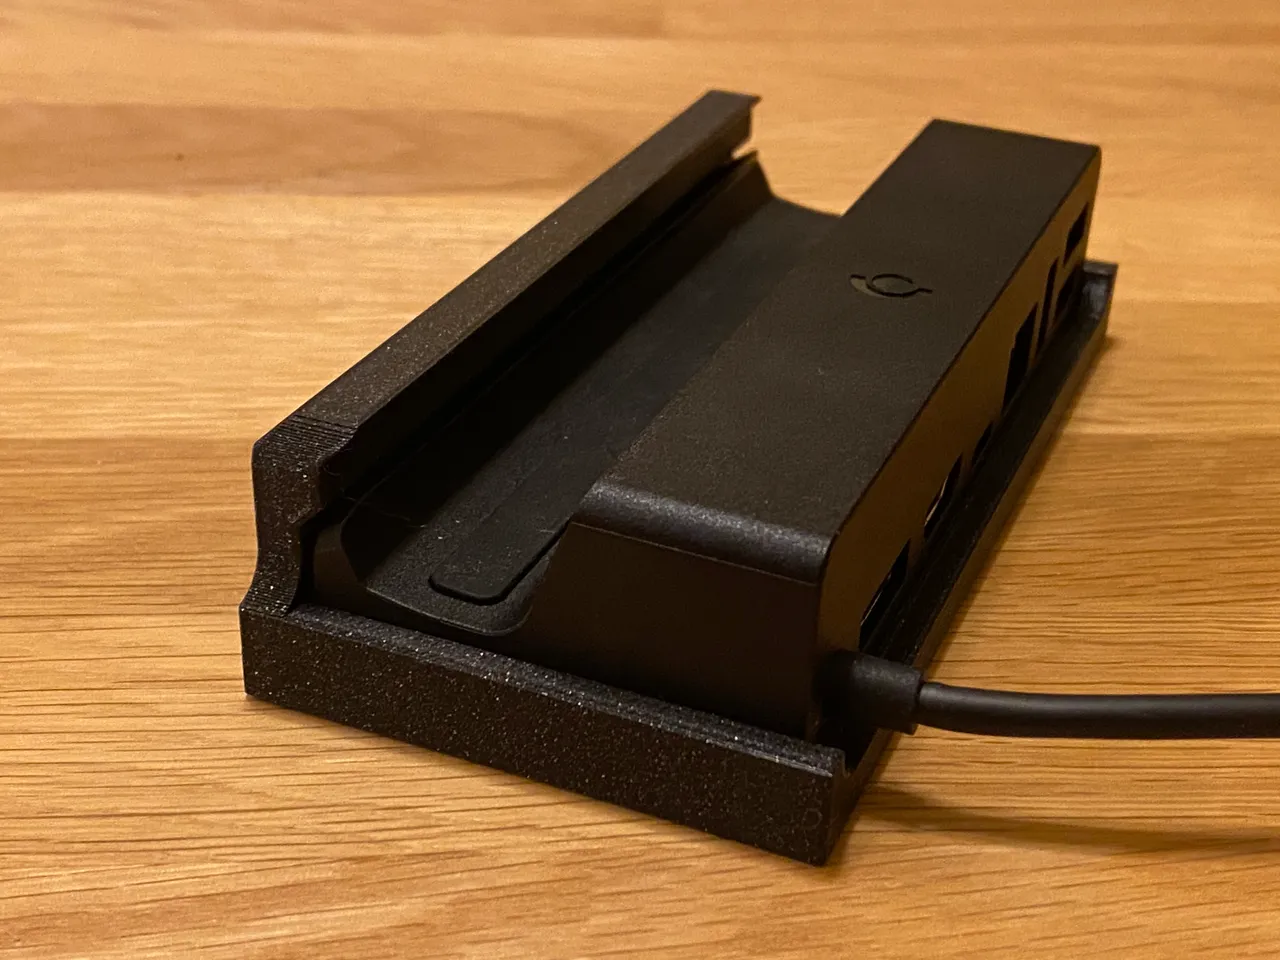 Adapter for the Steam Deck Docking Station to fit an ASUS ROG Ally by Brian, Download free STL model